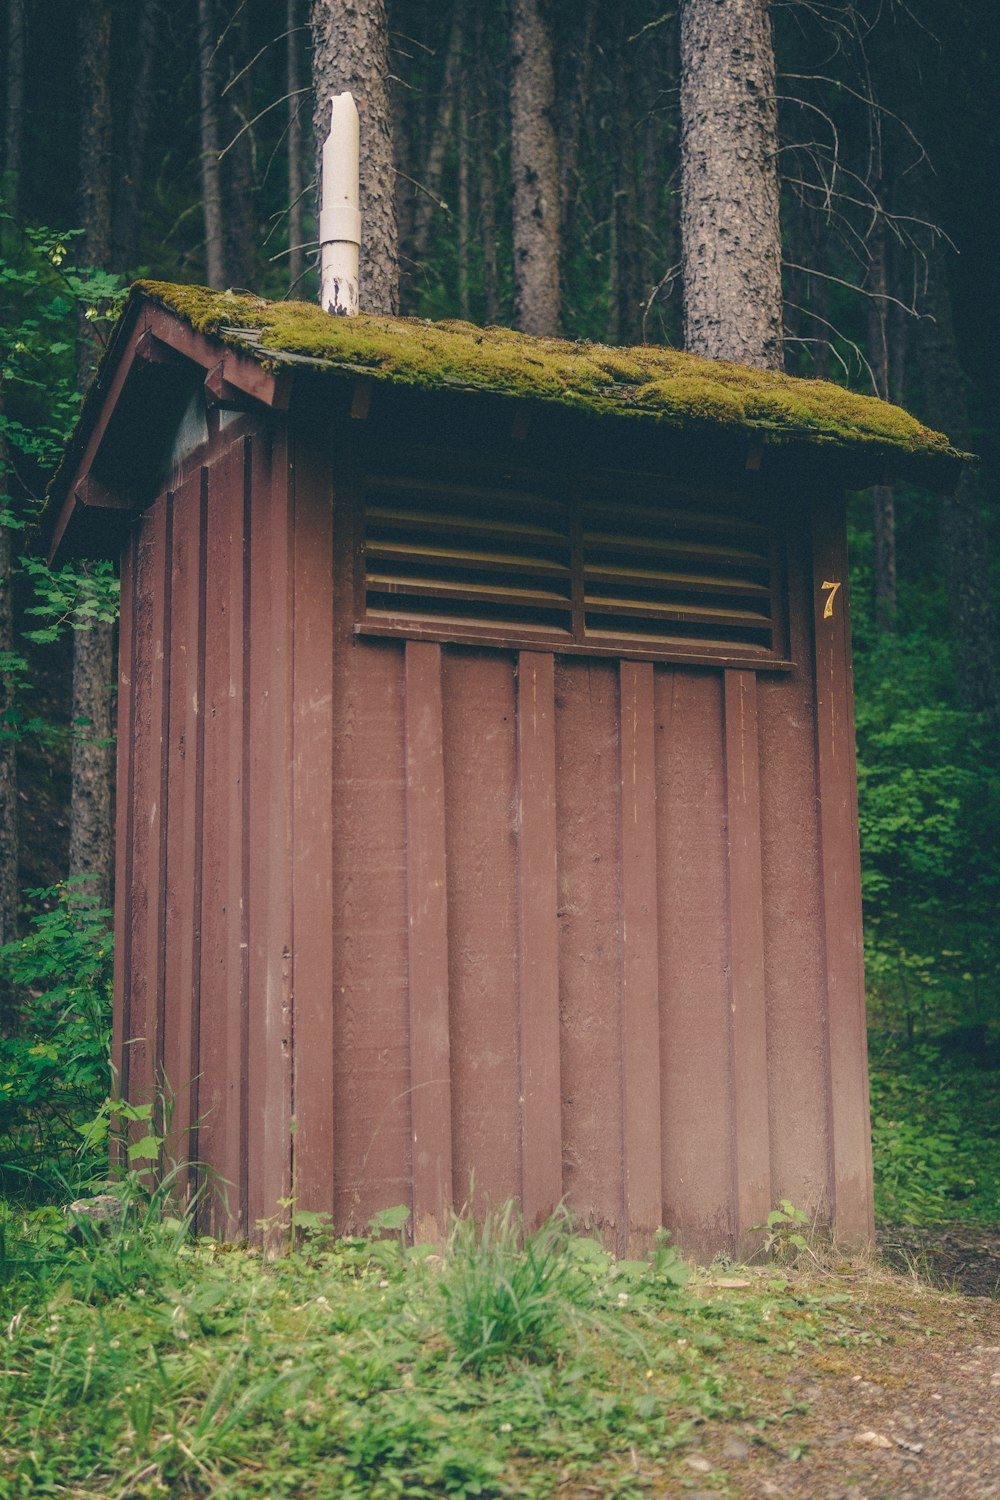 a small outhouse in the middle of a forest